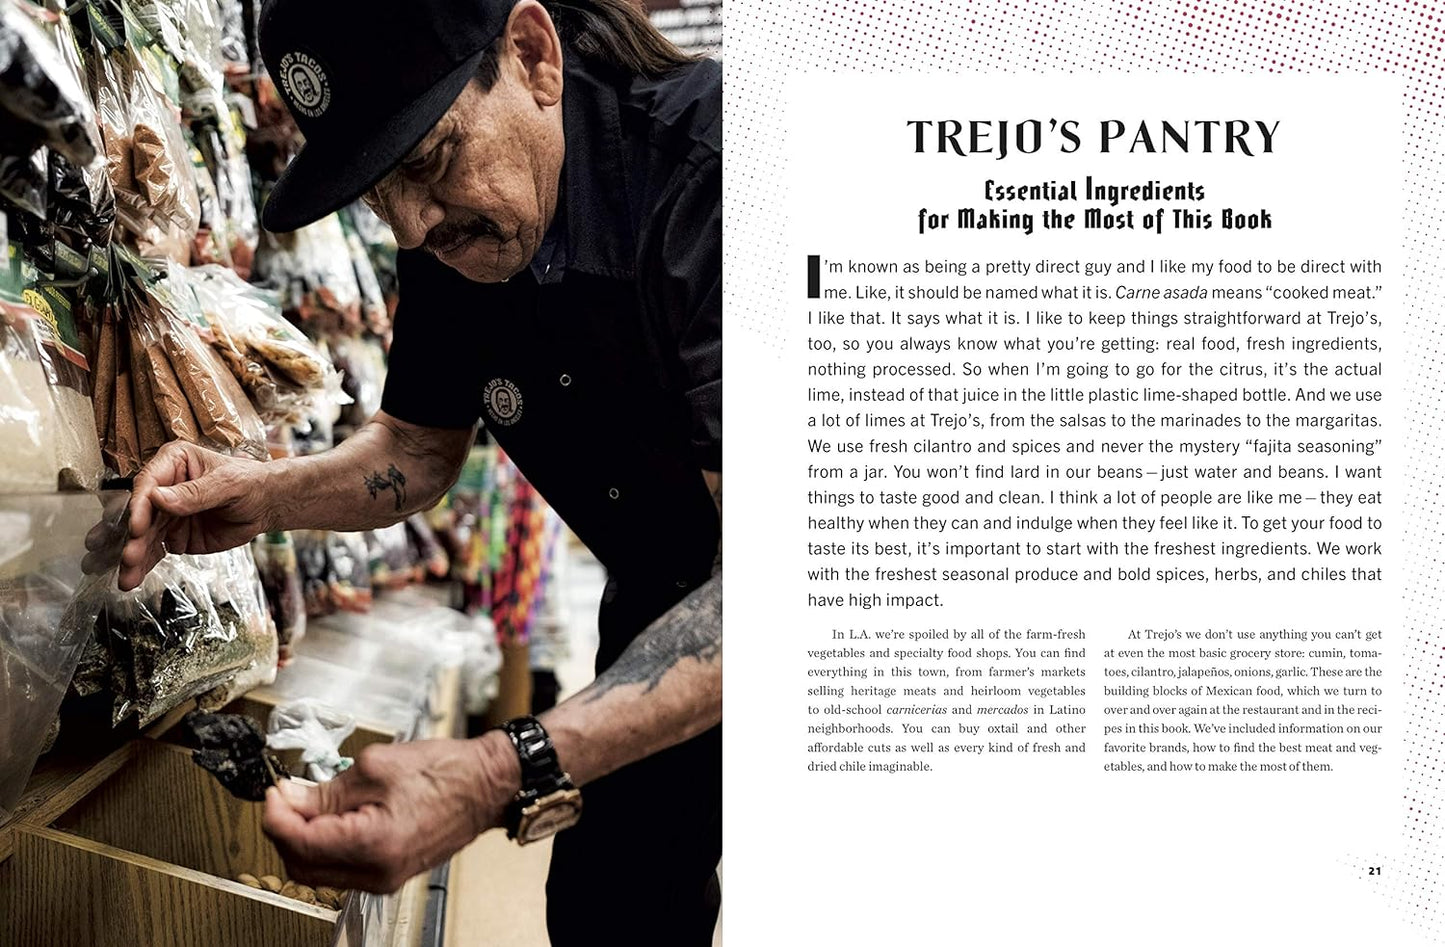 Trejo's Tacos: Recipes and Stories from L.A.: A Cookbook